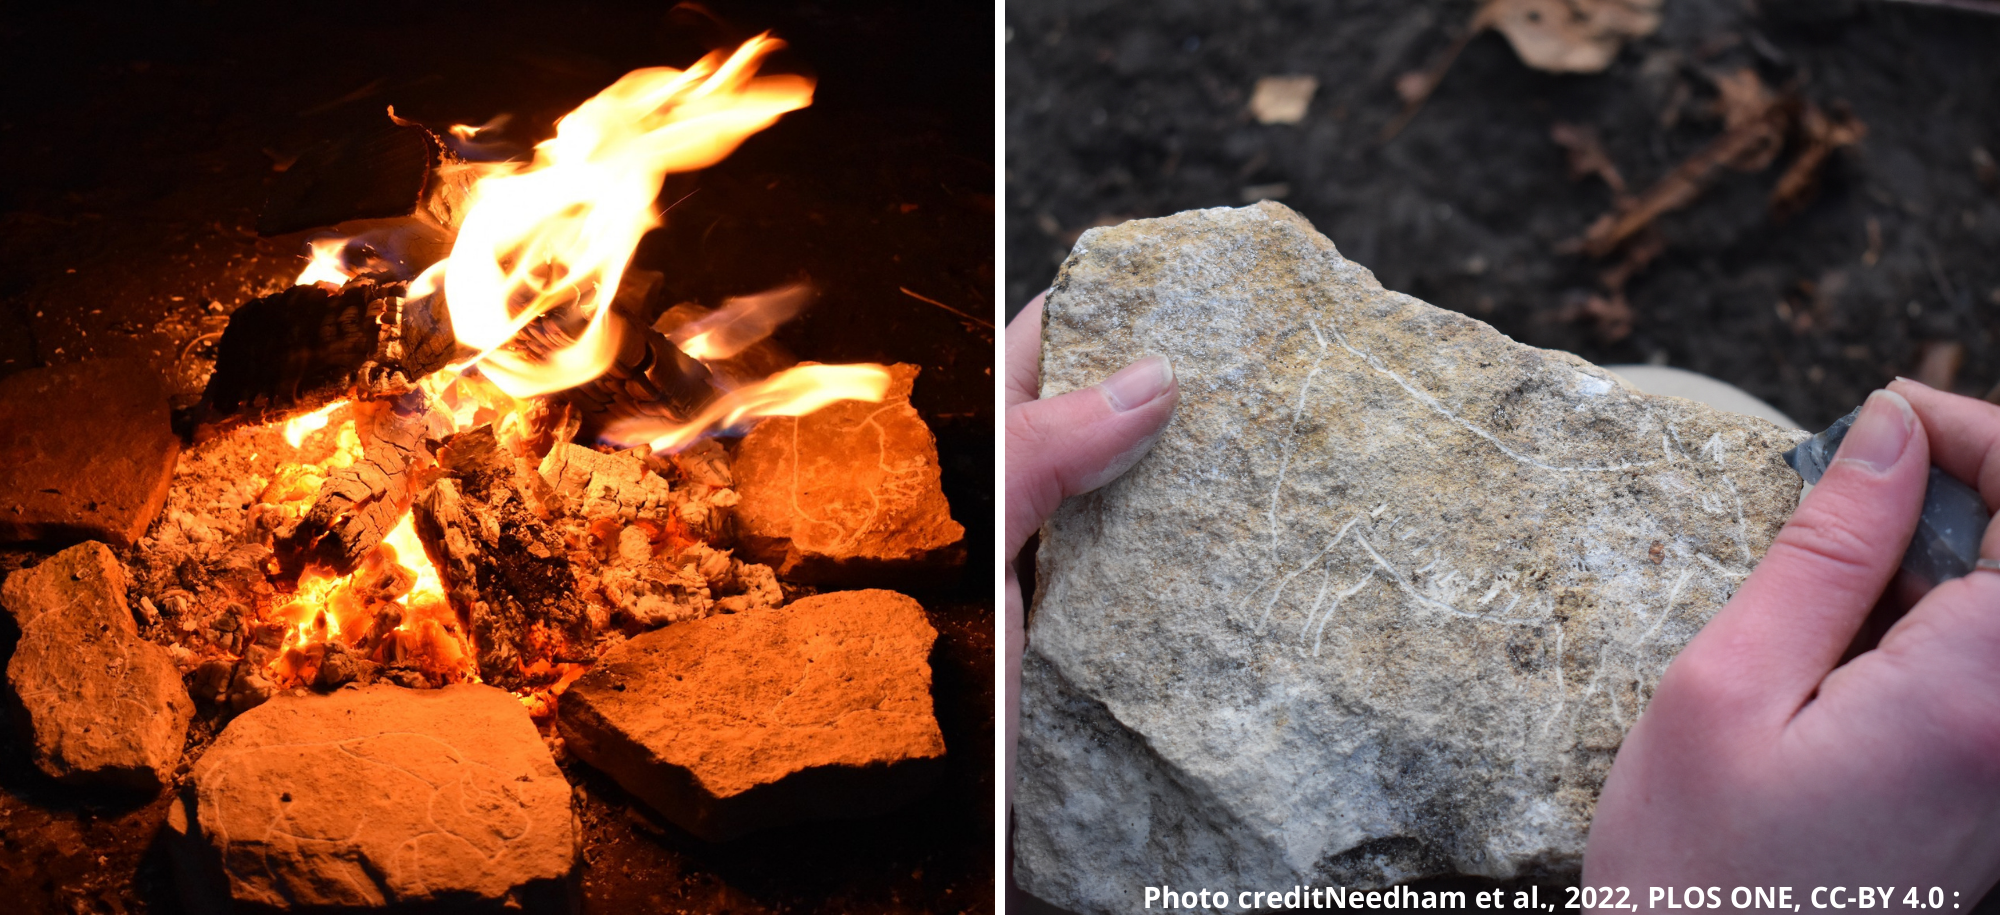 On the left a fire with stones around it. On the right a hand holding a stone with an animal carving.